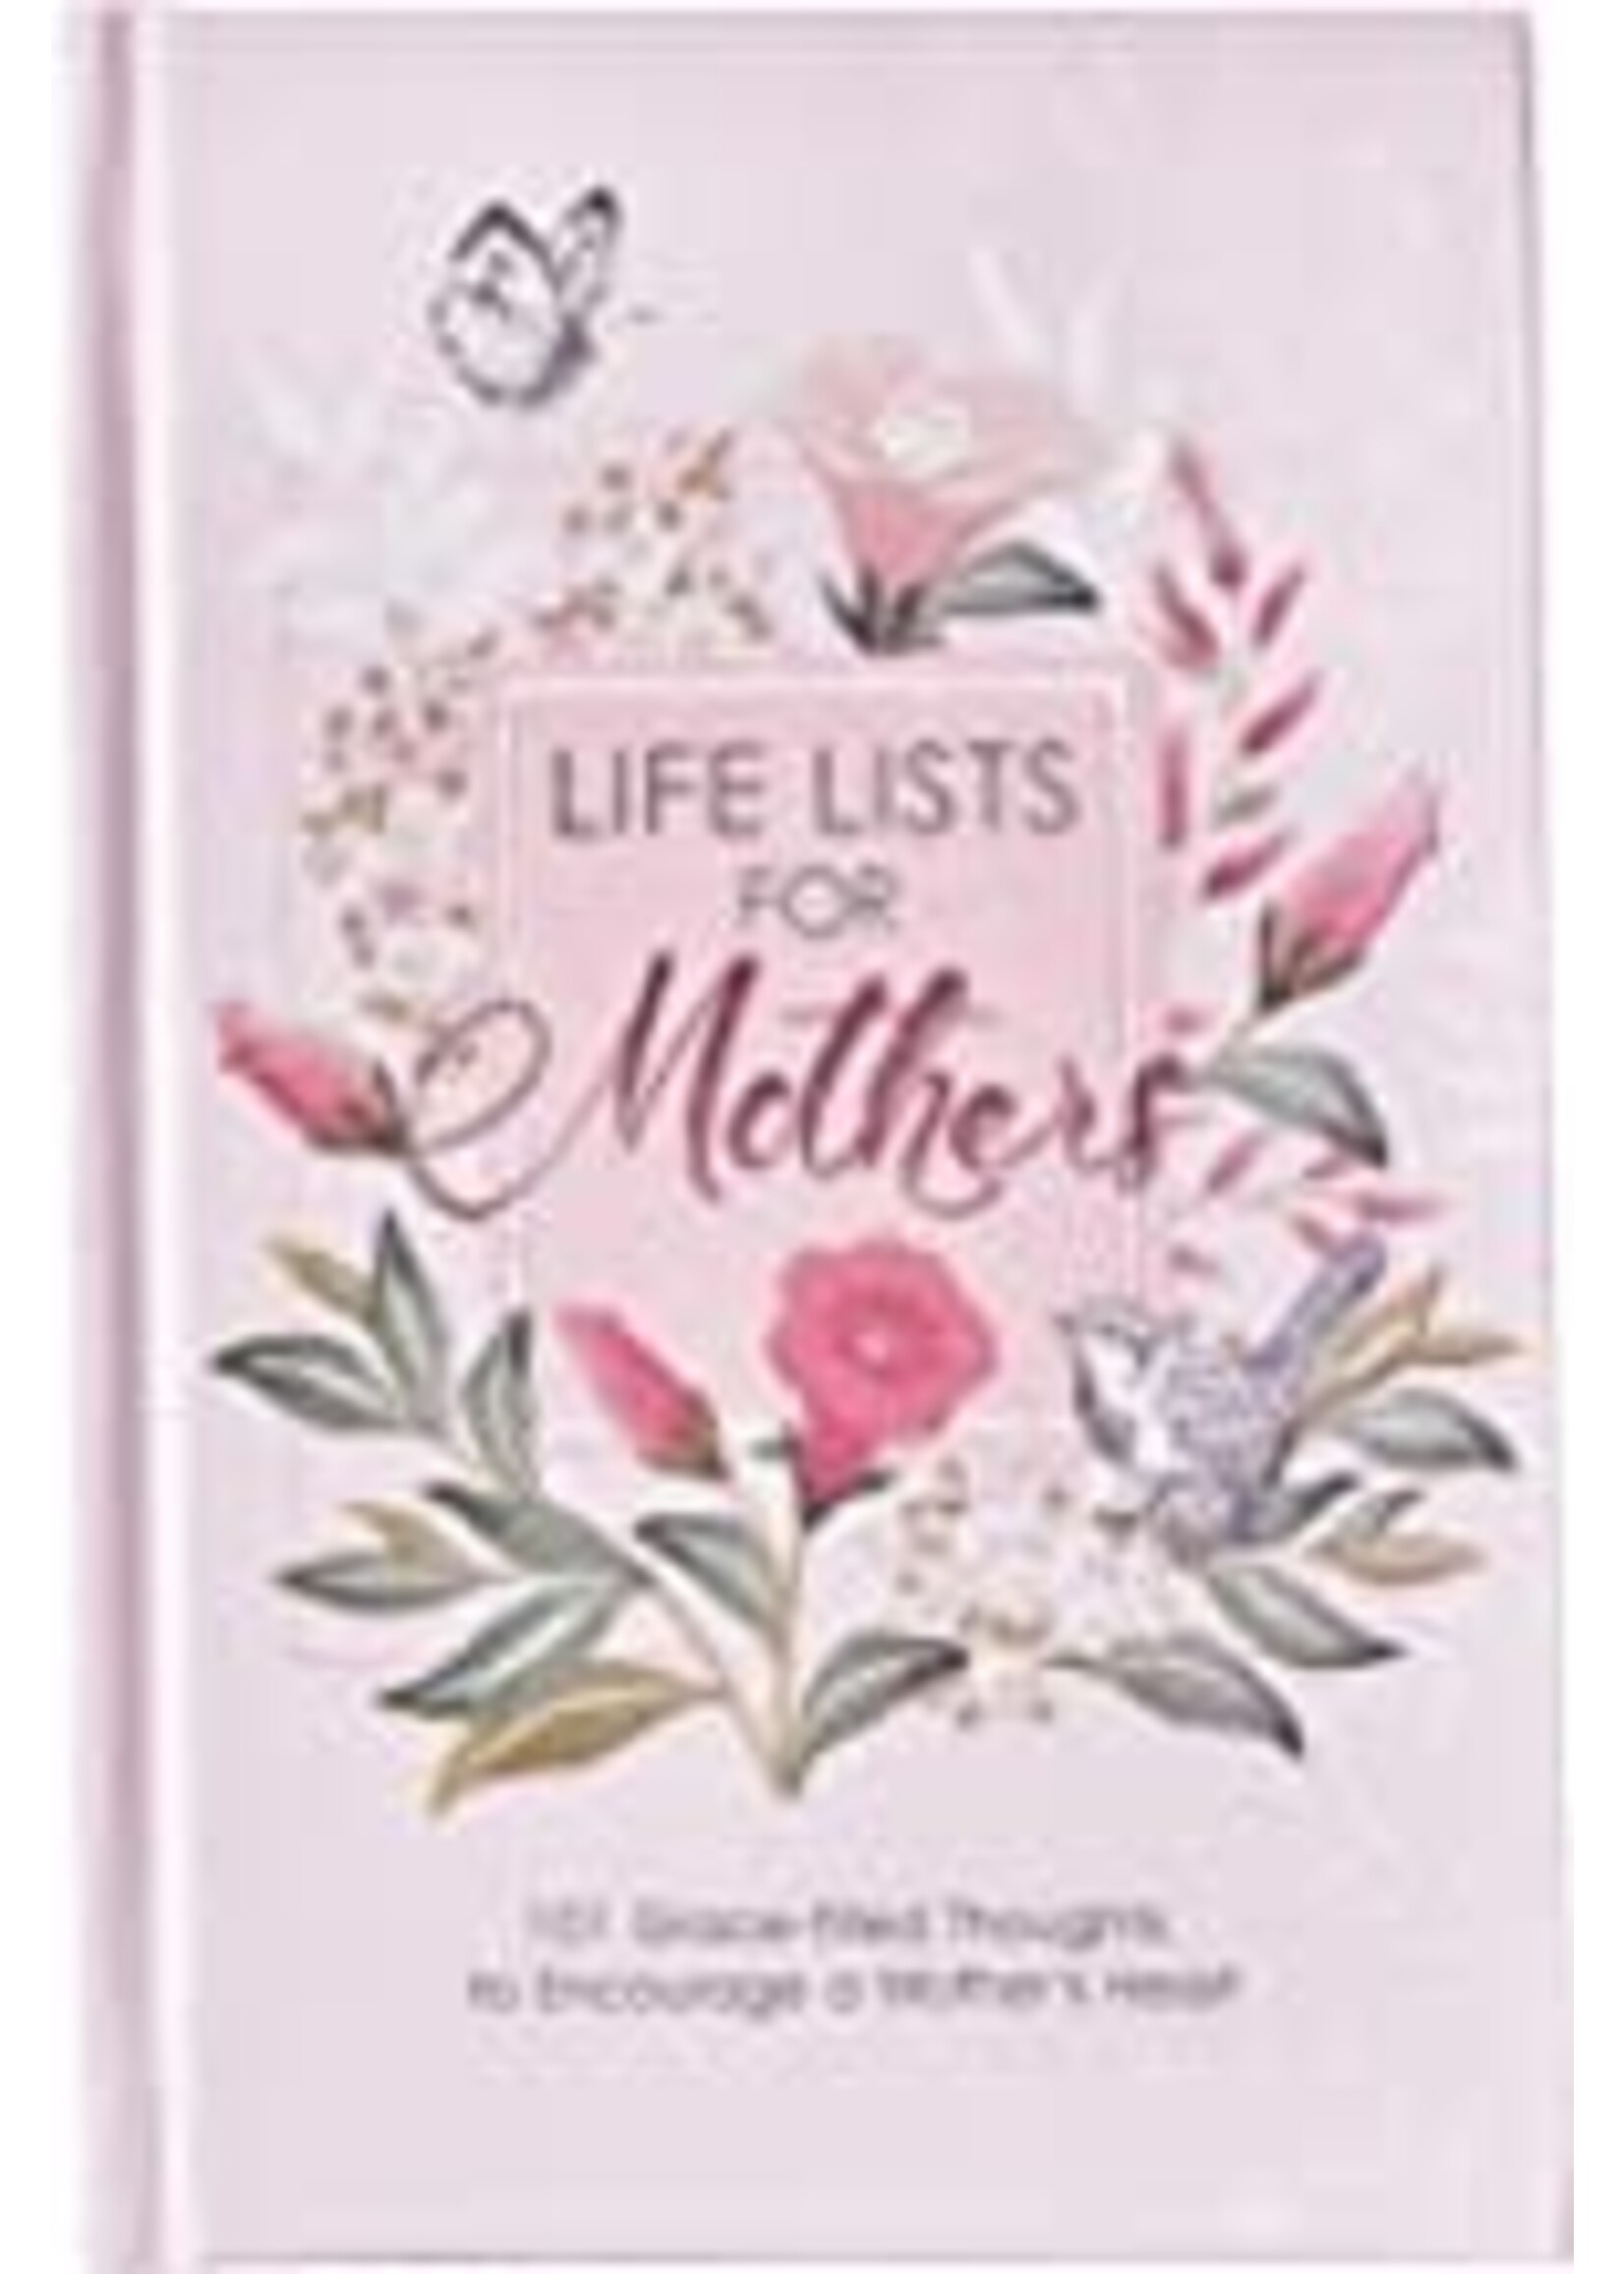 LIFE LISTS FOR MOTHERS